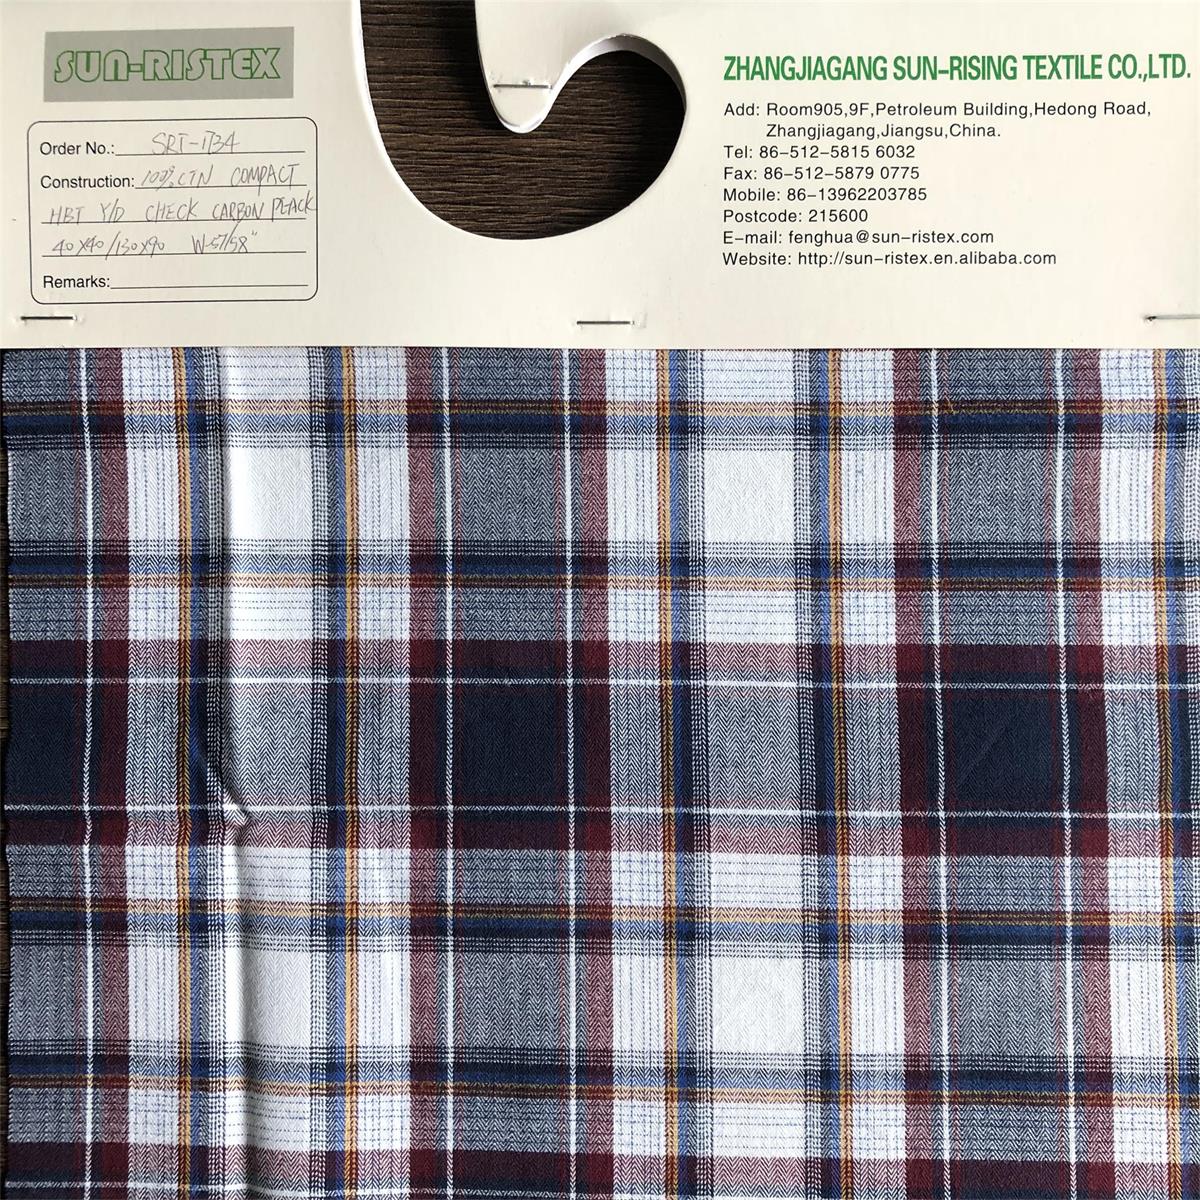 Yarn Dyed Fabric by compact yarn 100% cotton yarn dyed herringbone check carbon peached shirts woven fabric for men's shirts